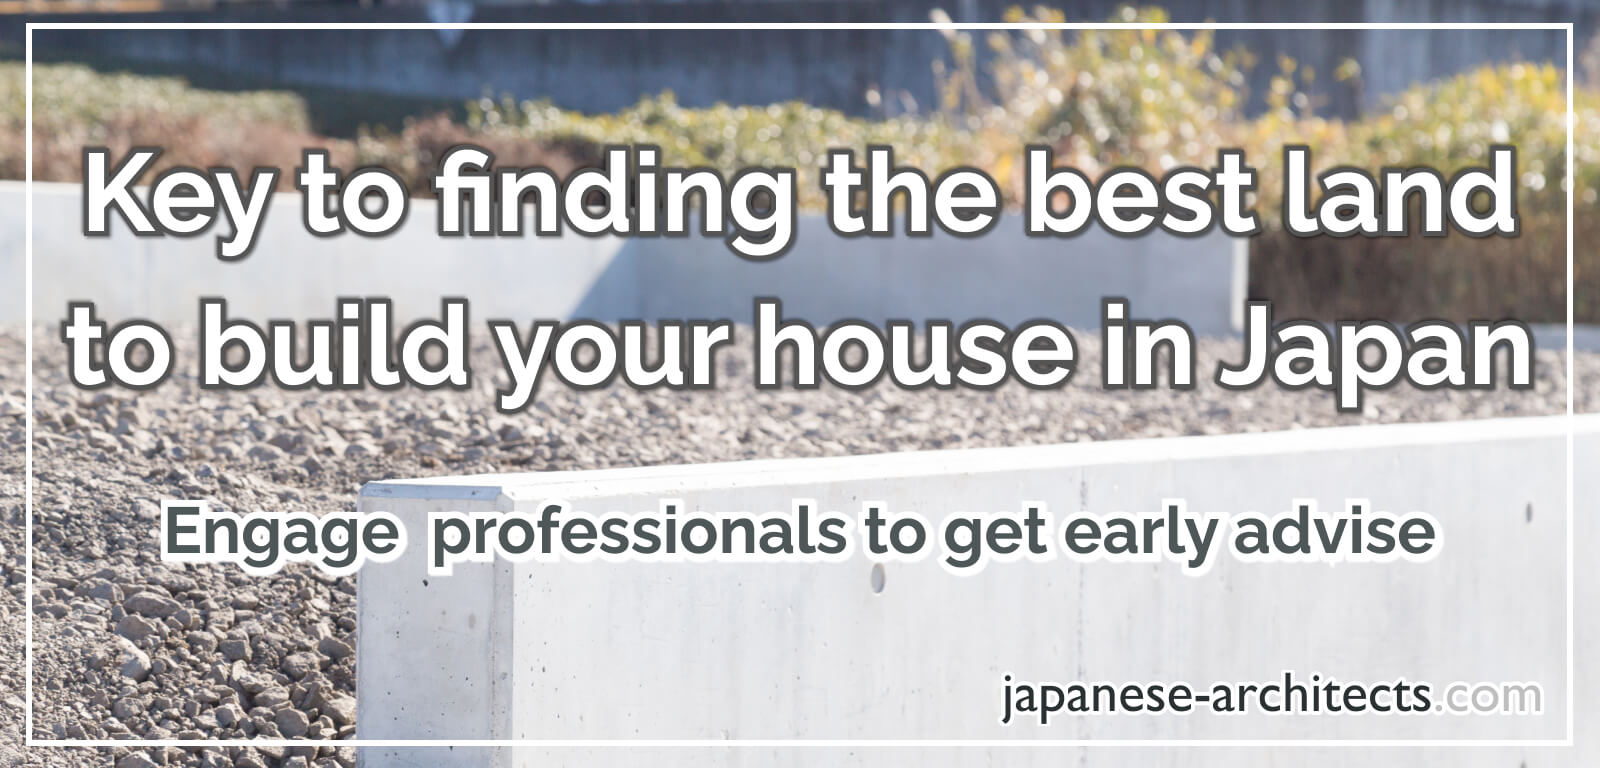 Key to finding the best land to build a house in Japan